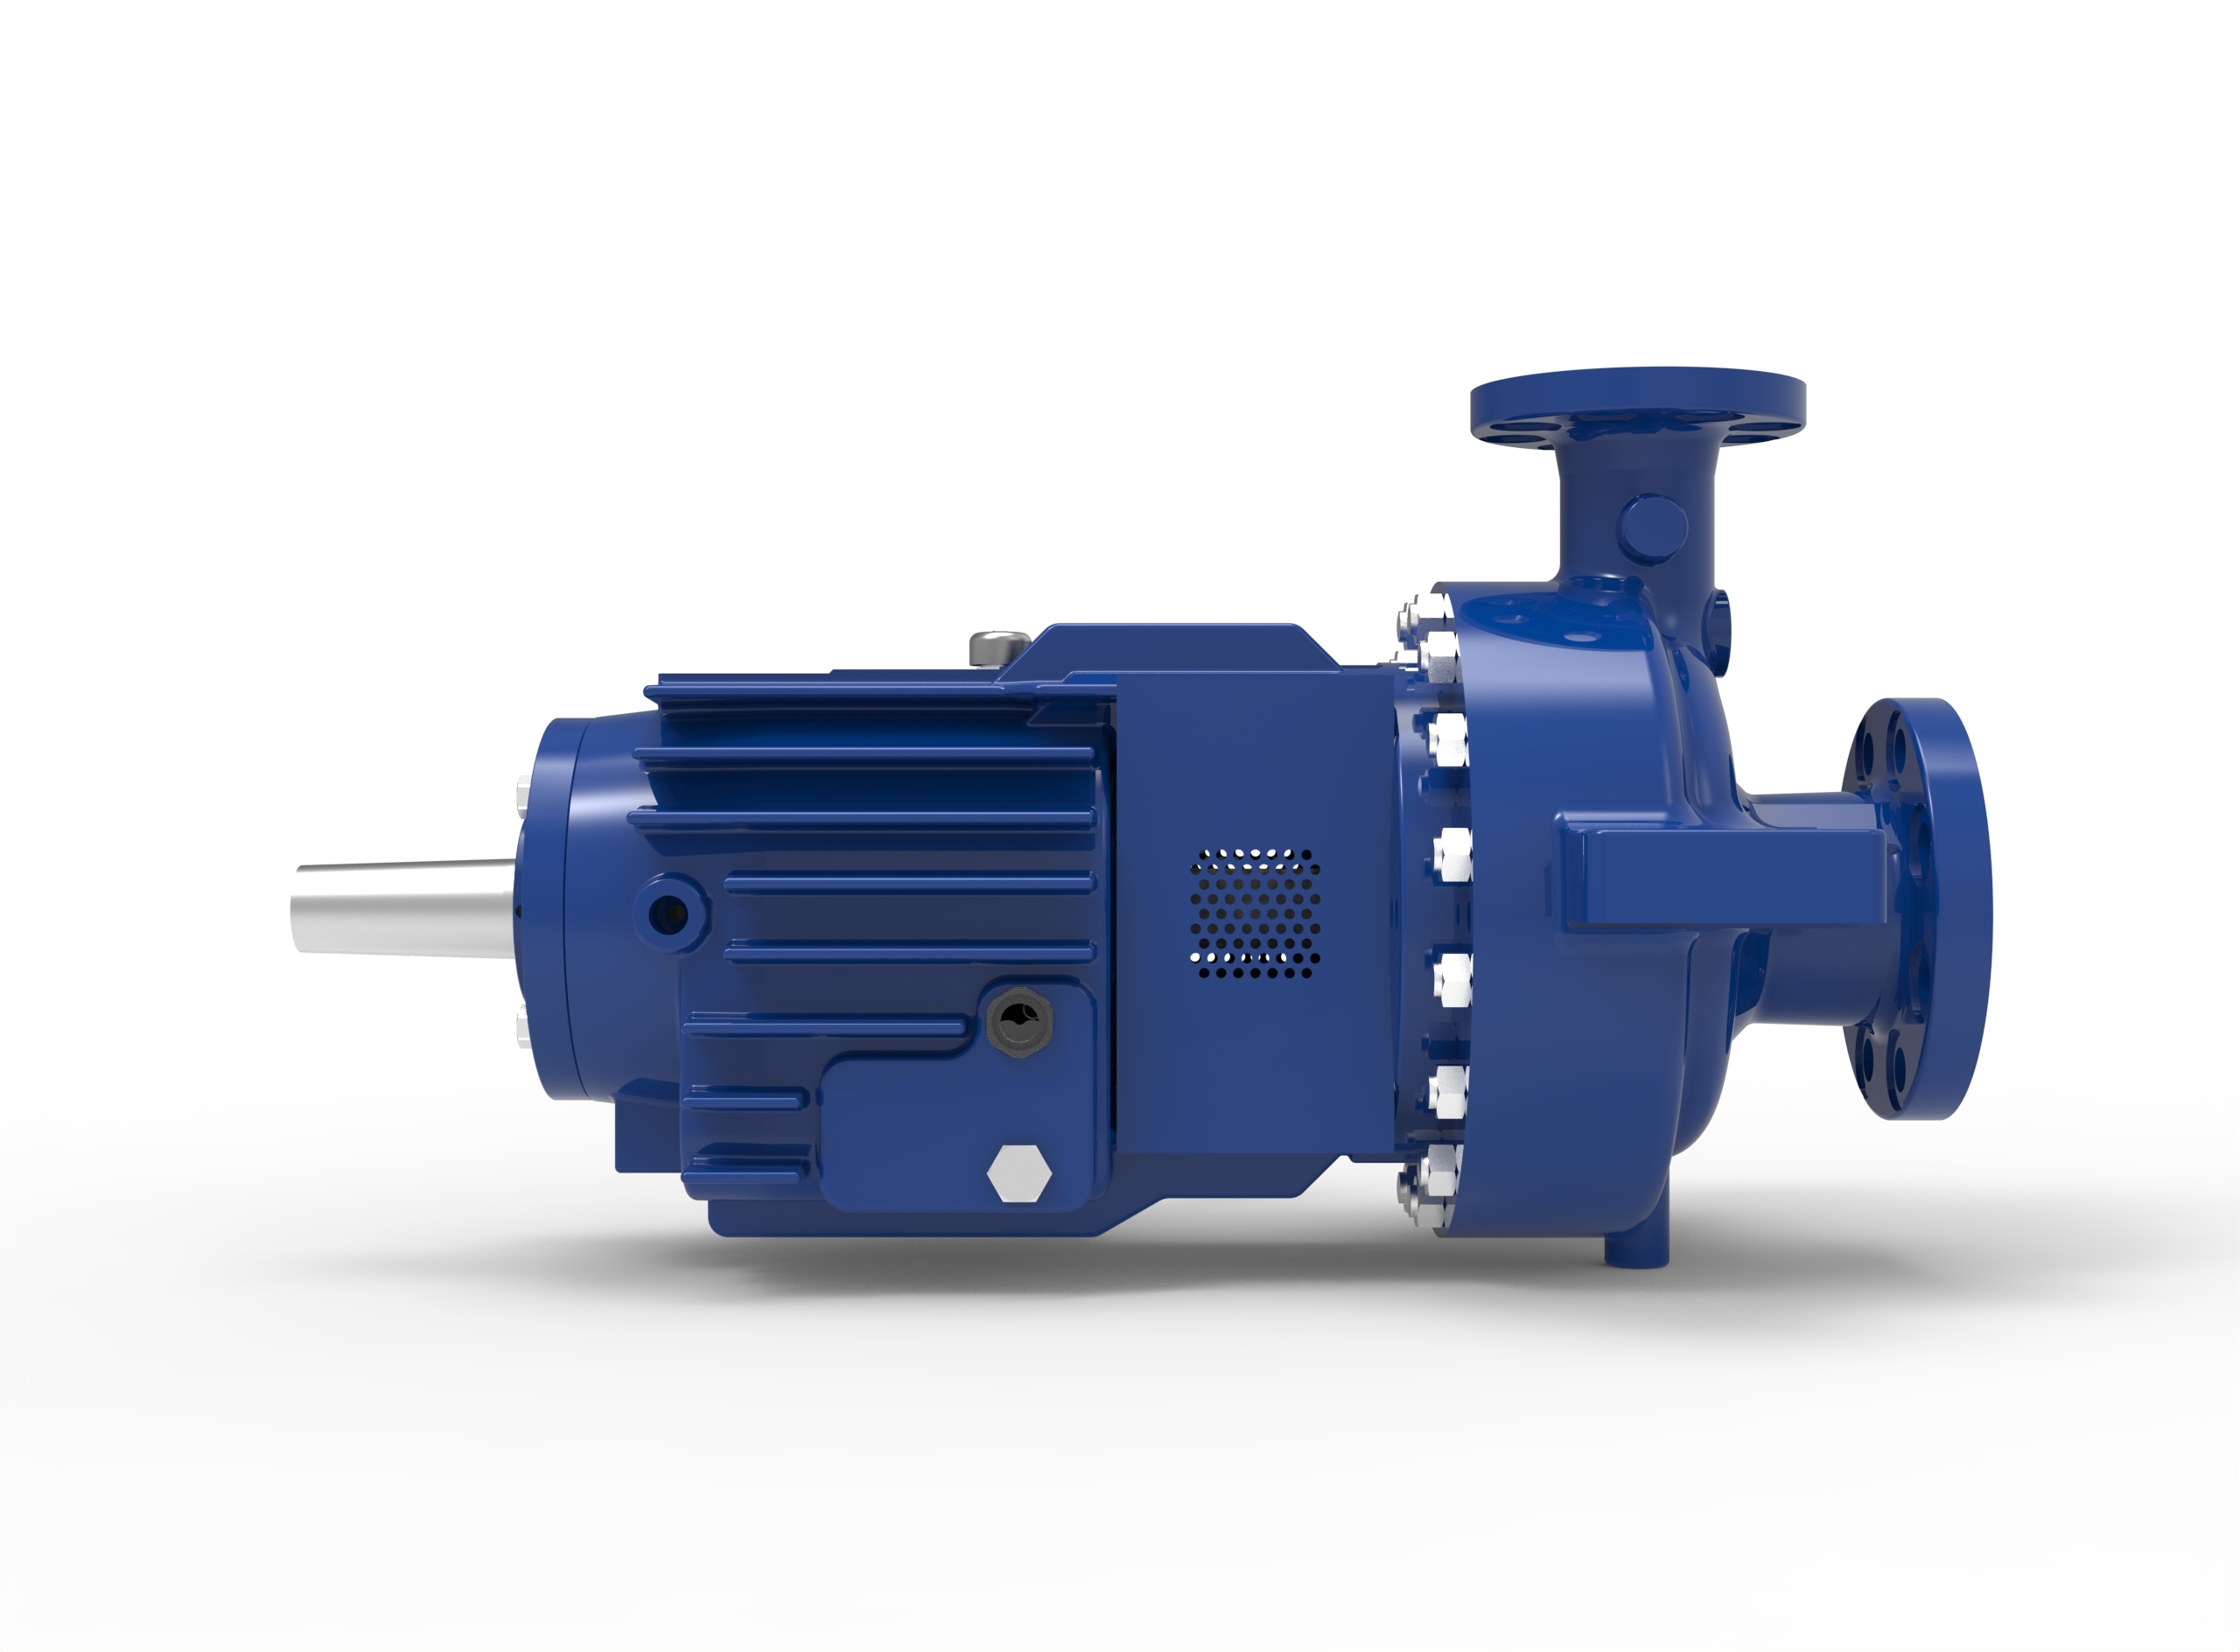 Left side view of a Termomeccanica Pompe AP OH2 610 Centrifugal Pump manufactured by Trillium Flow Technologies